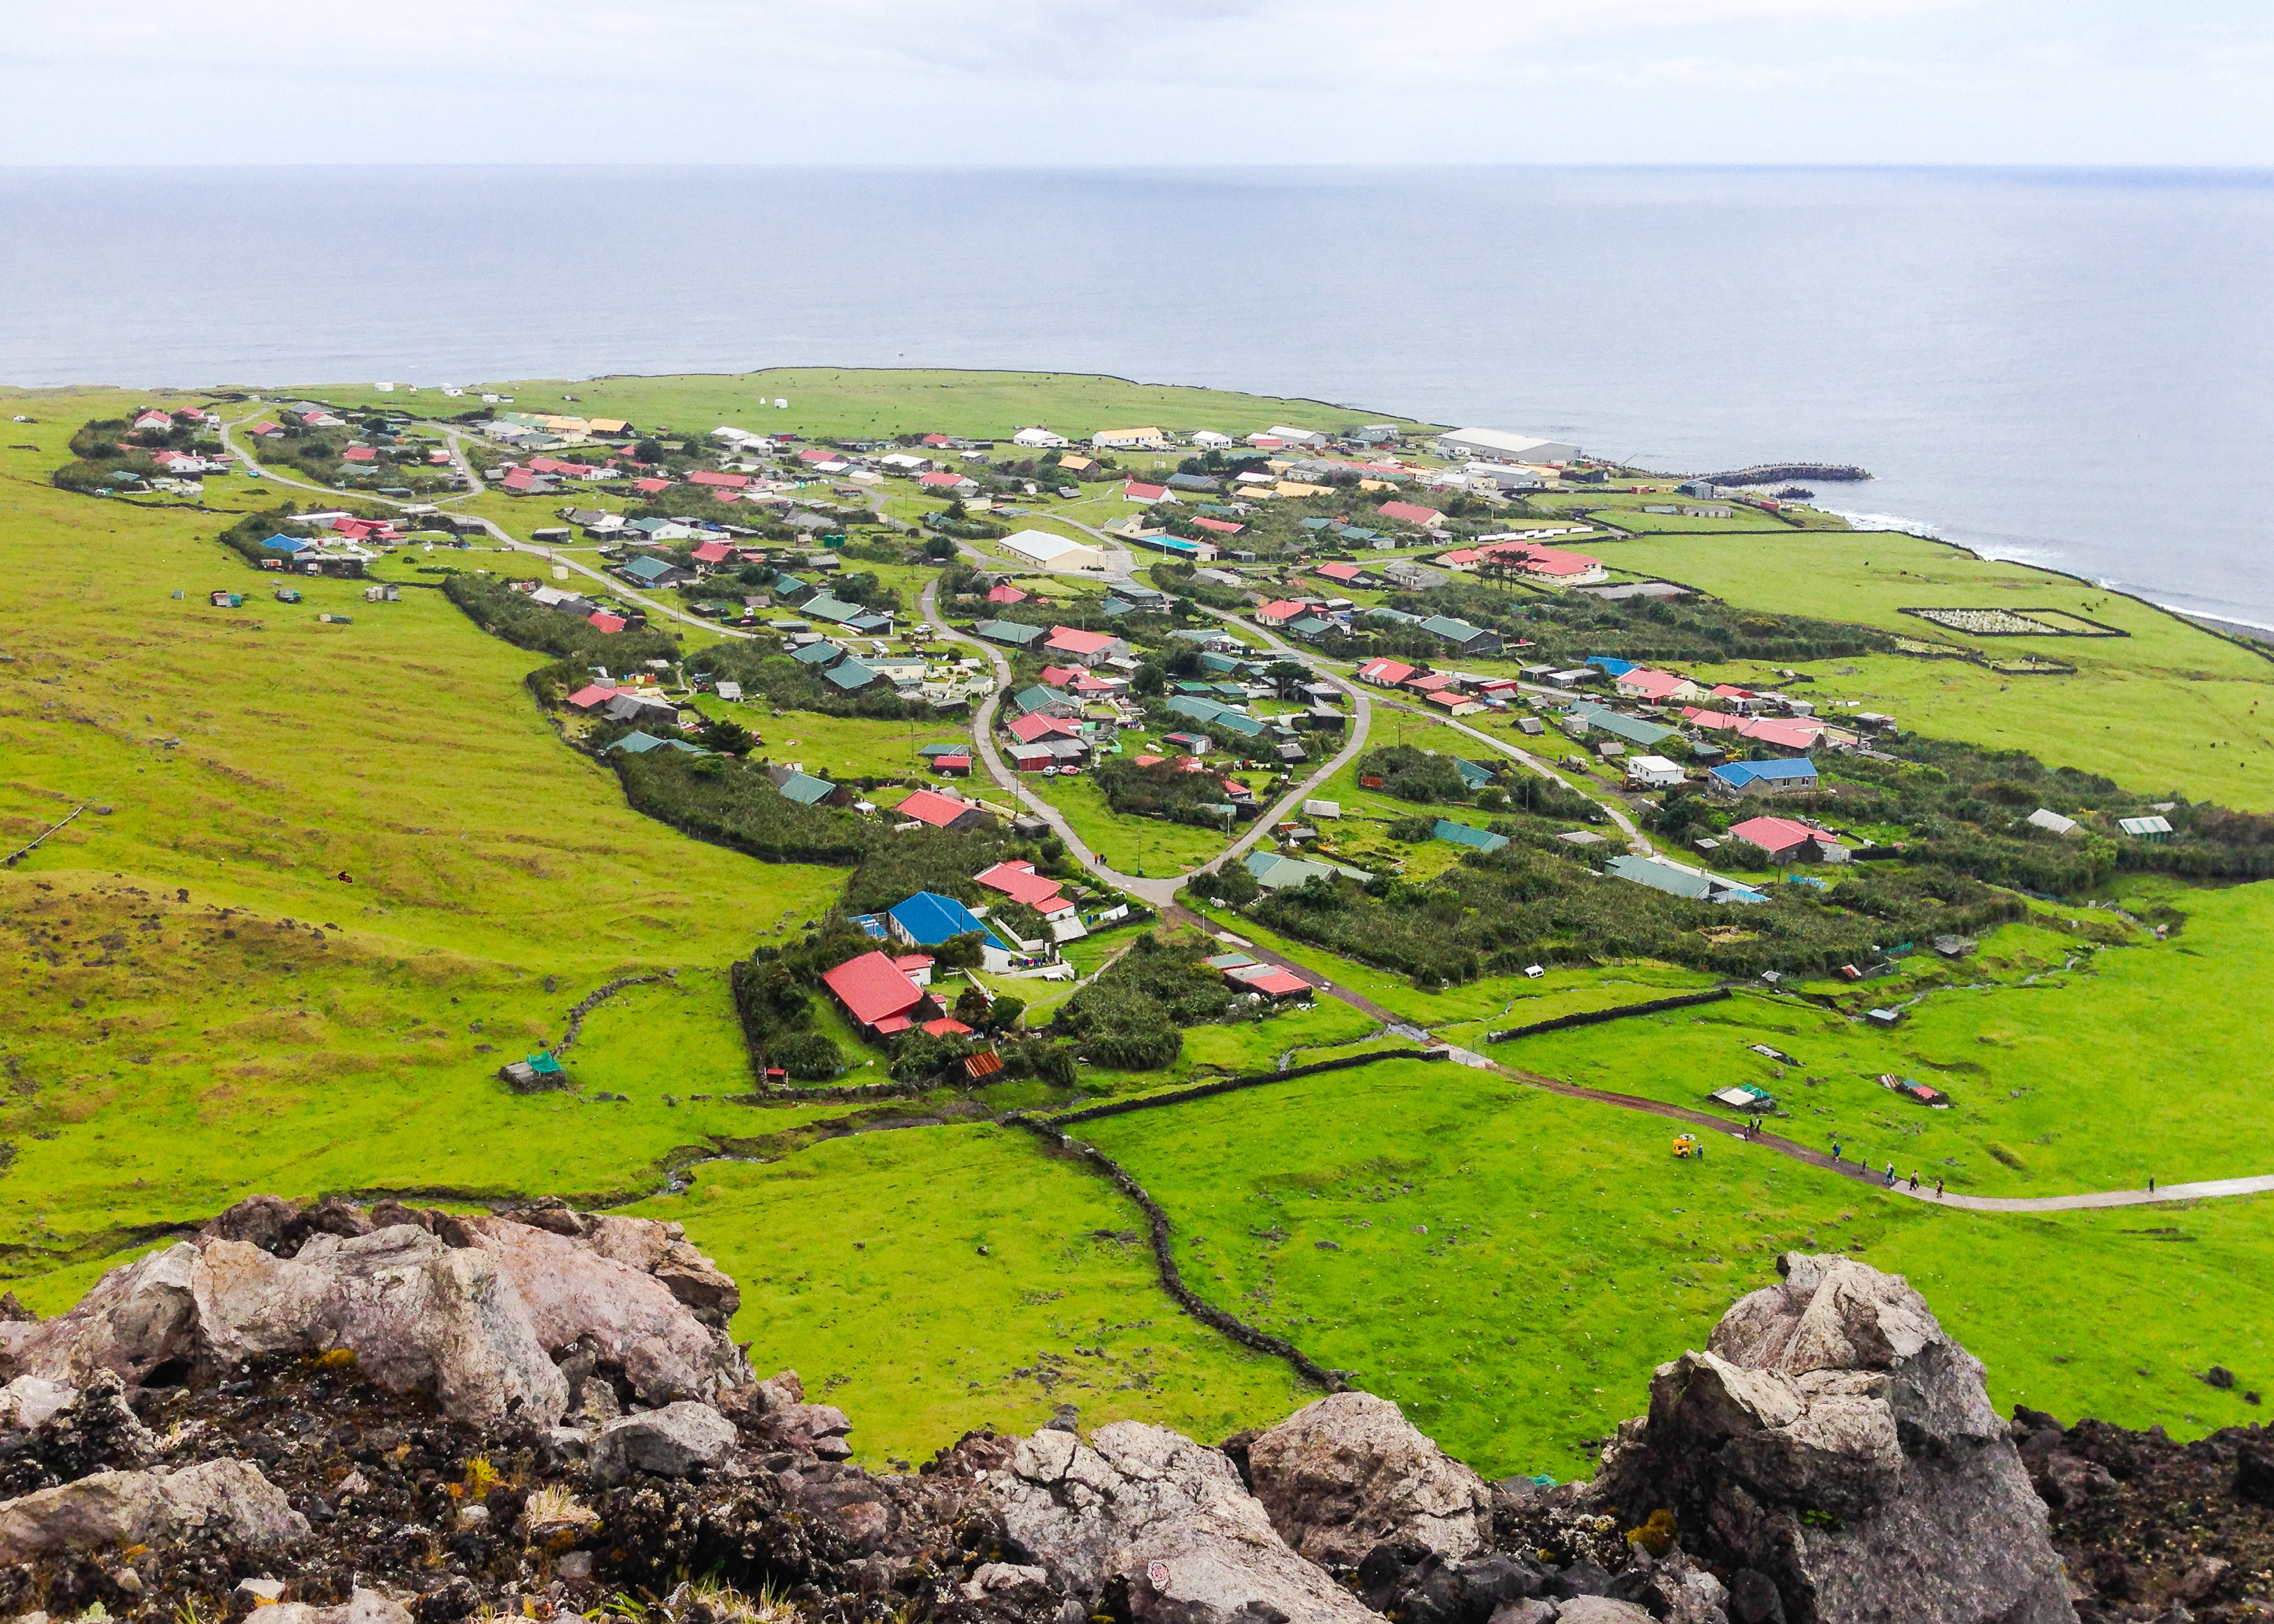 houses with red roofs in a green grass field overlooking the ocean